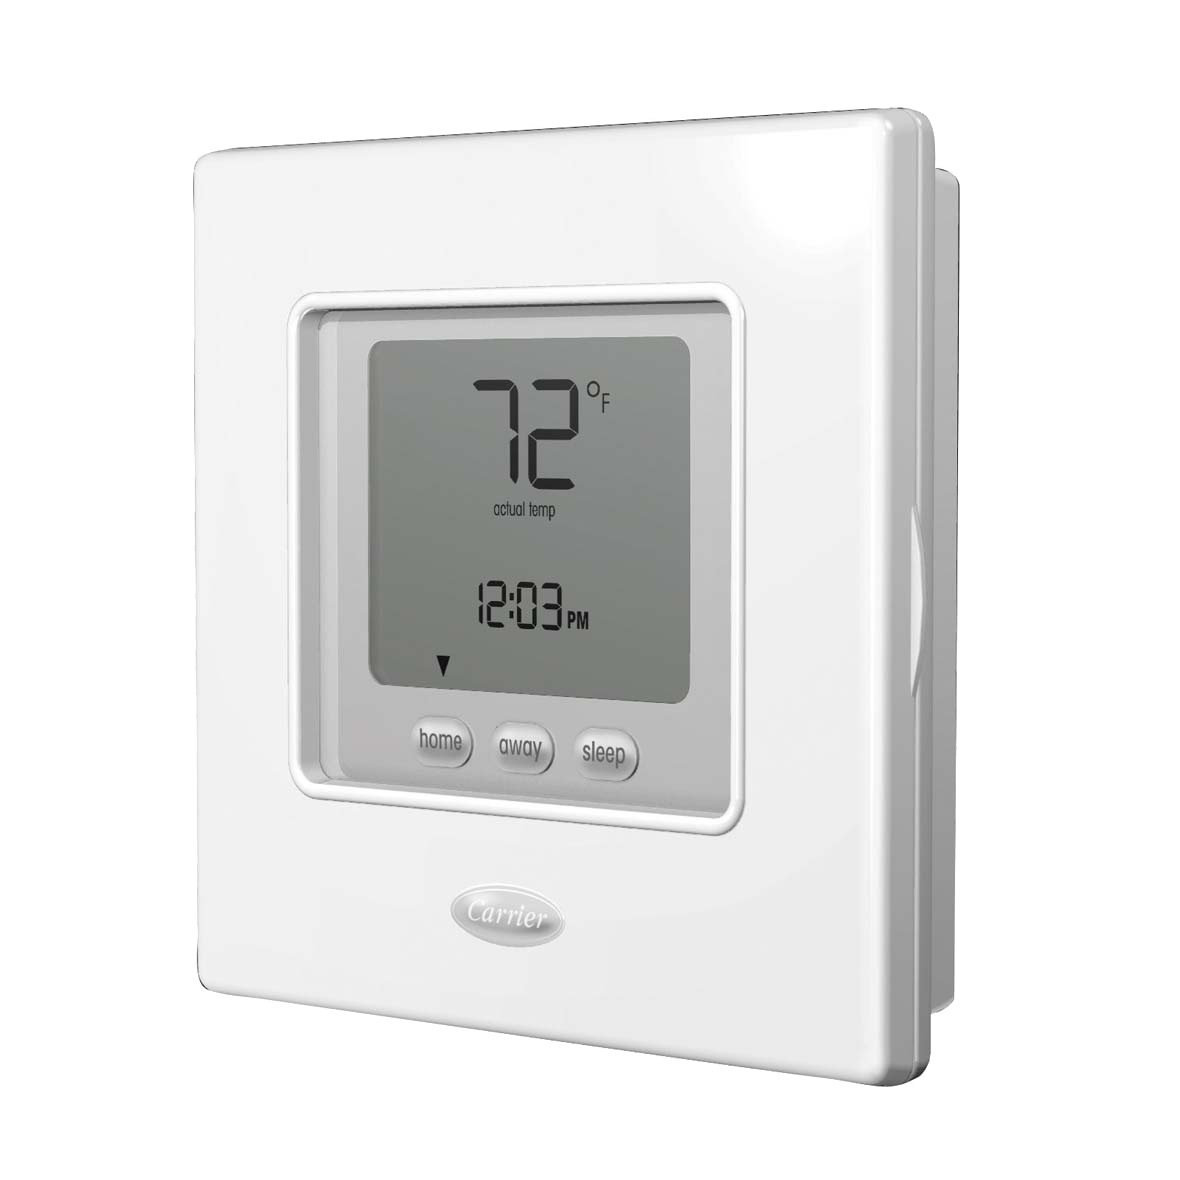 Carrier Comfort Programmable Touch-N-Go Thermostat